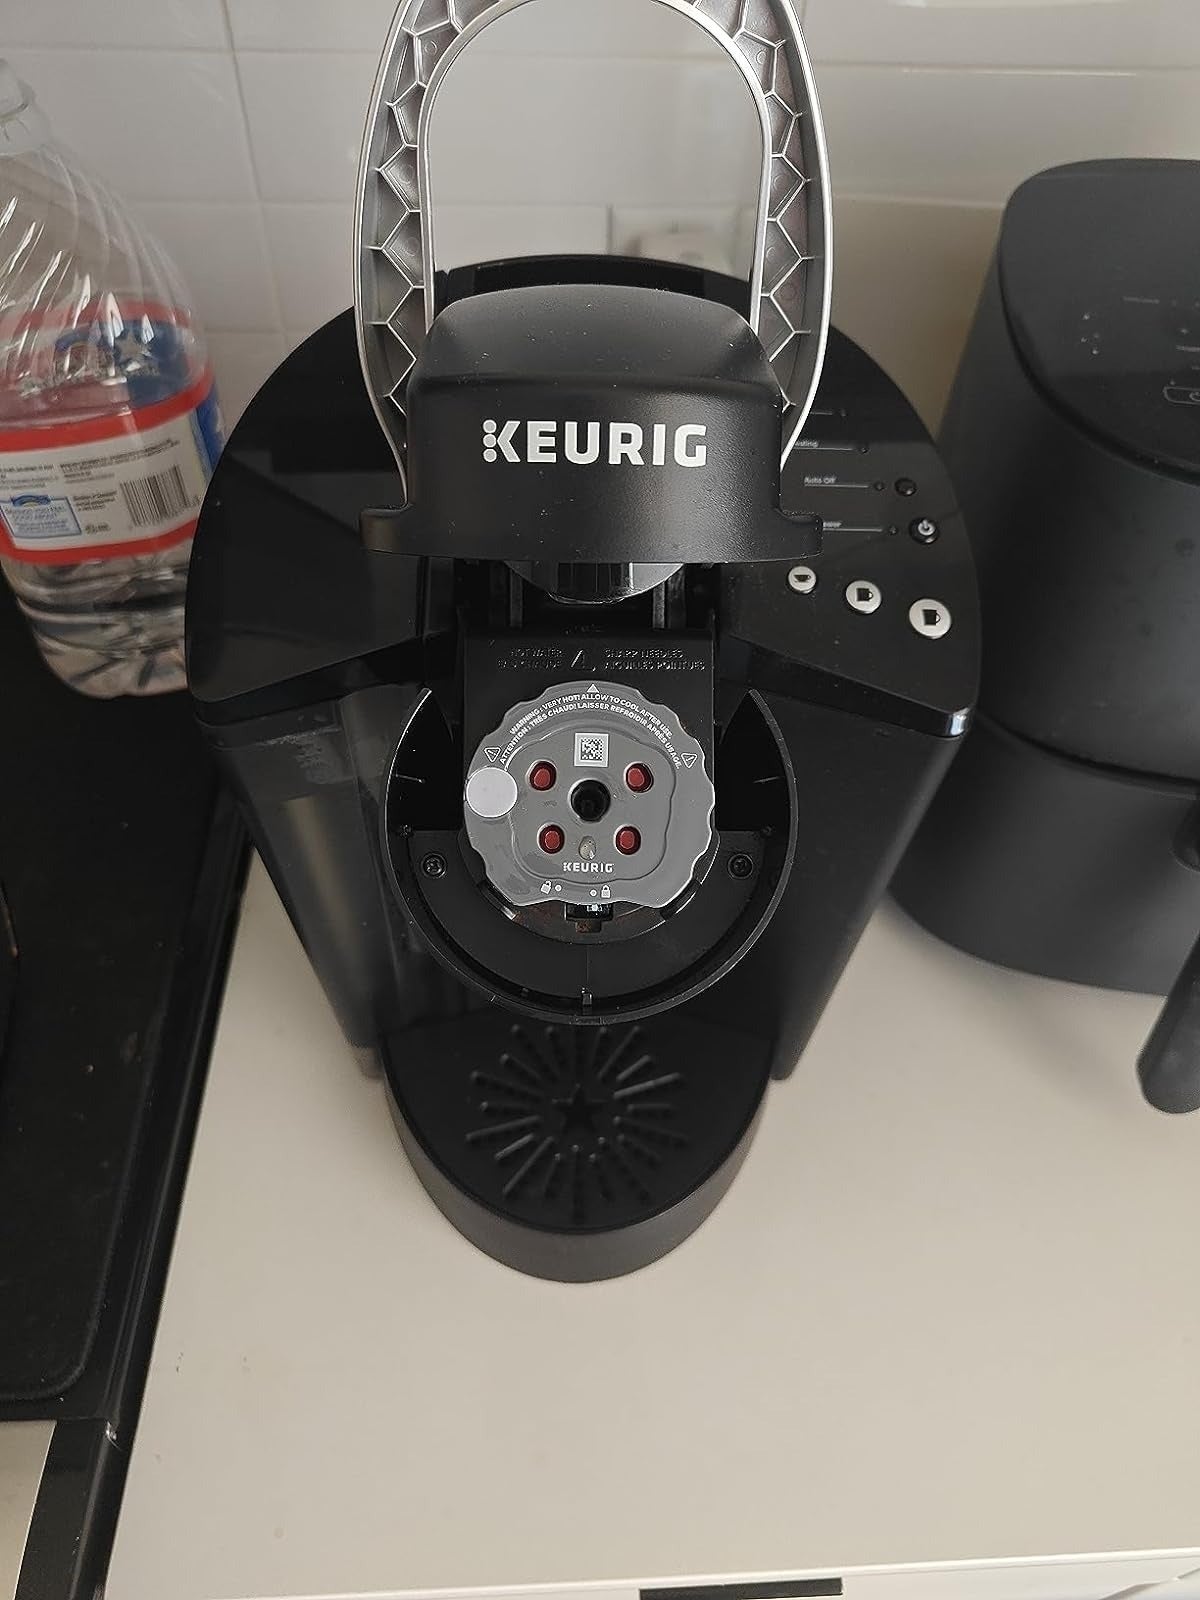 Facts About Keurig Coffee Makers - Trivia About Keurig